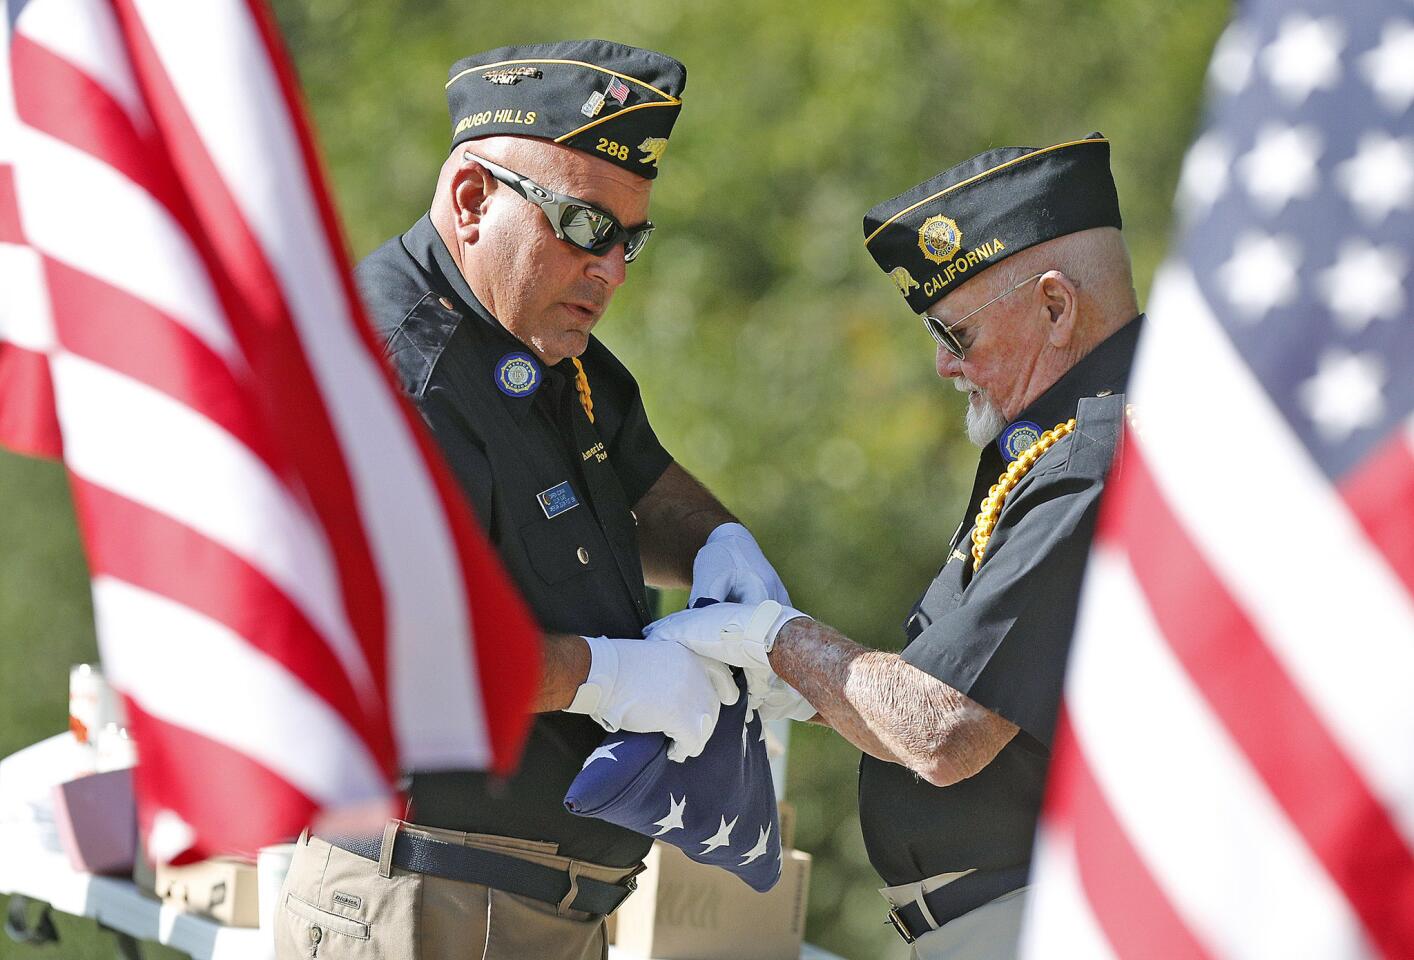 Color guard members and veterans Darren Azarian and Jack Wunderlich, with American Legion Post 288, work out the details for their part in a ceremonial U.S. Flag folding to recognize James Bauder at a Memorial Day service at Two Strike Park in La Crescenta at the Memorial Wall on Monday, May 28, 2018. The ceremony paid special recognition to recently found pilot James Bauder, missing since 1966 but found by a search crew in 2017.